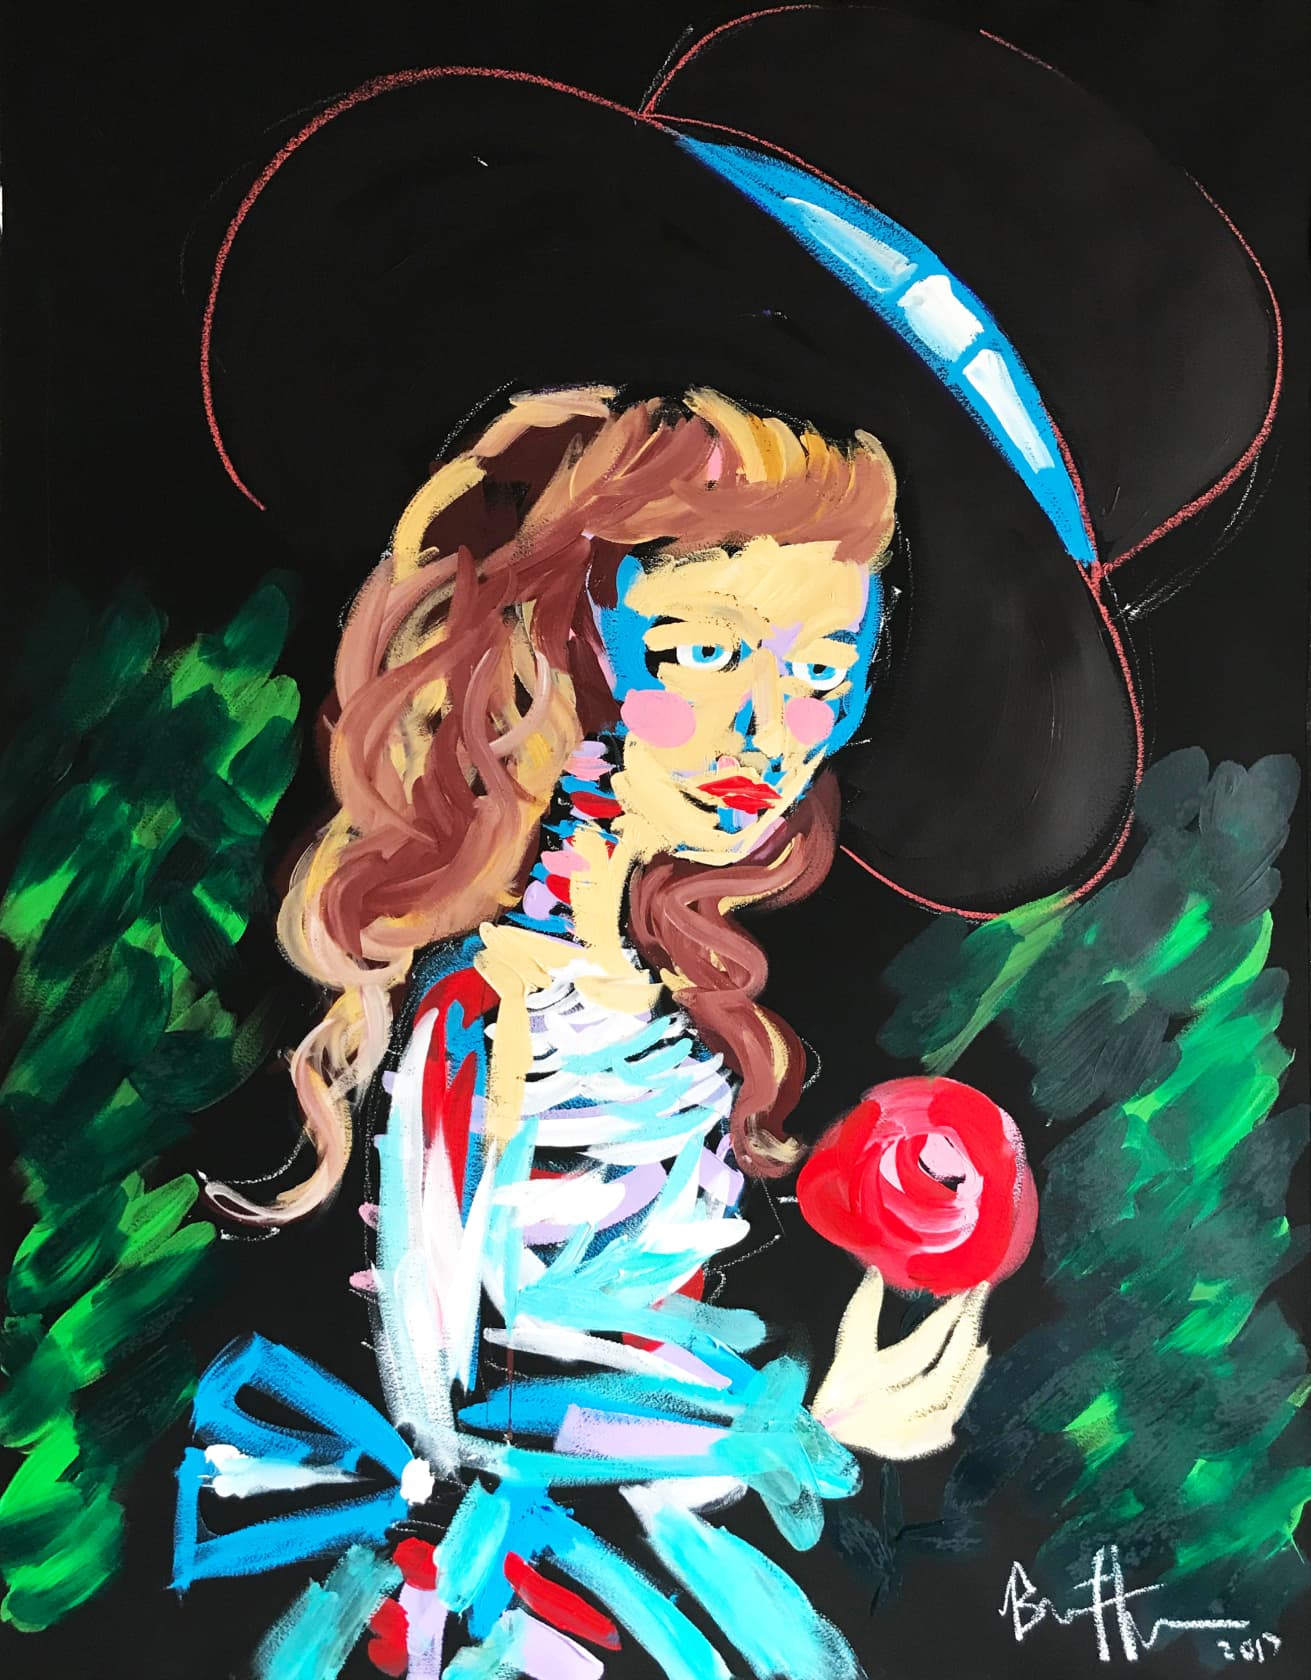 Bradley Theodore, Roses and Hat, 2017